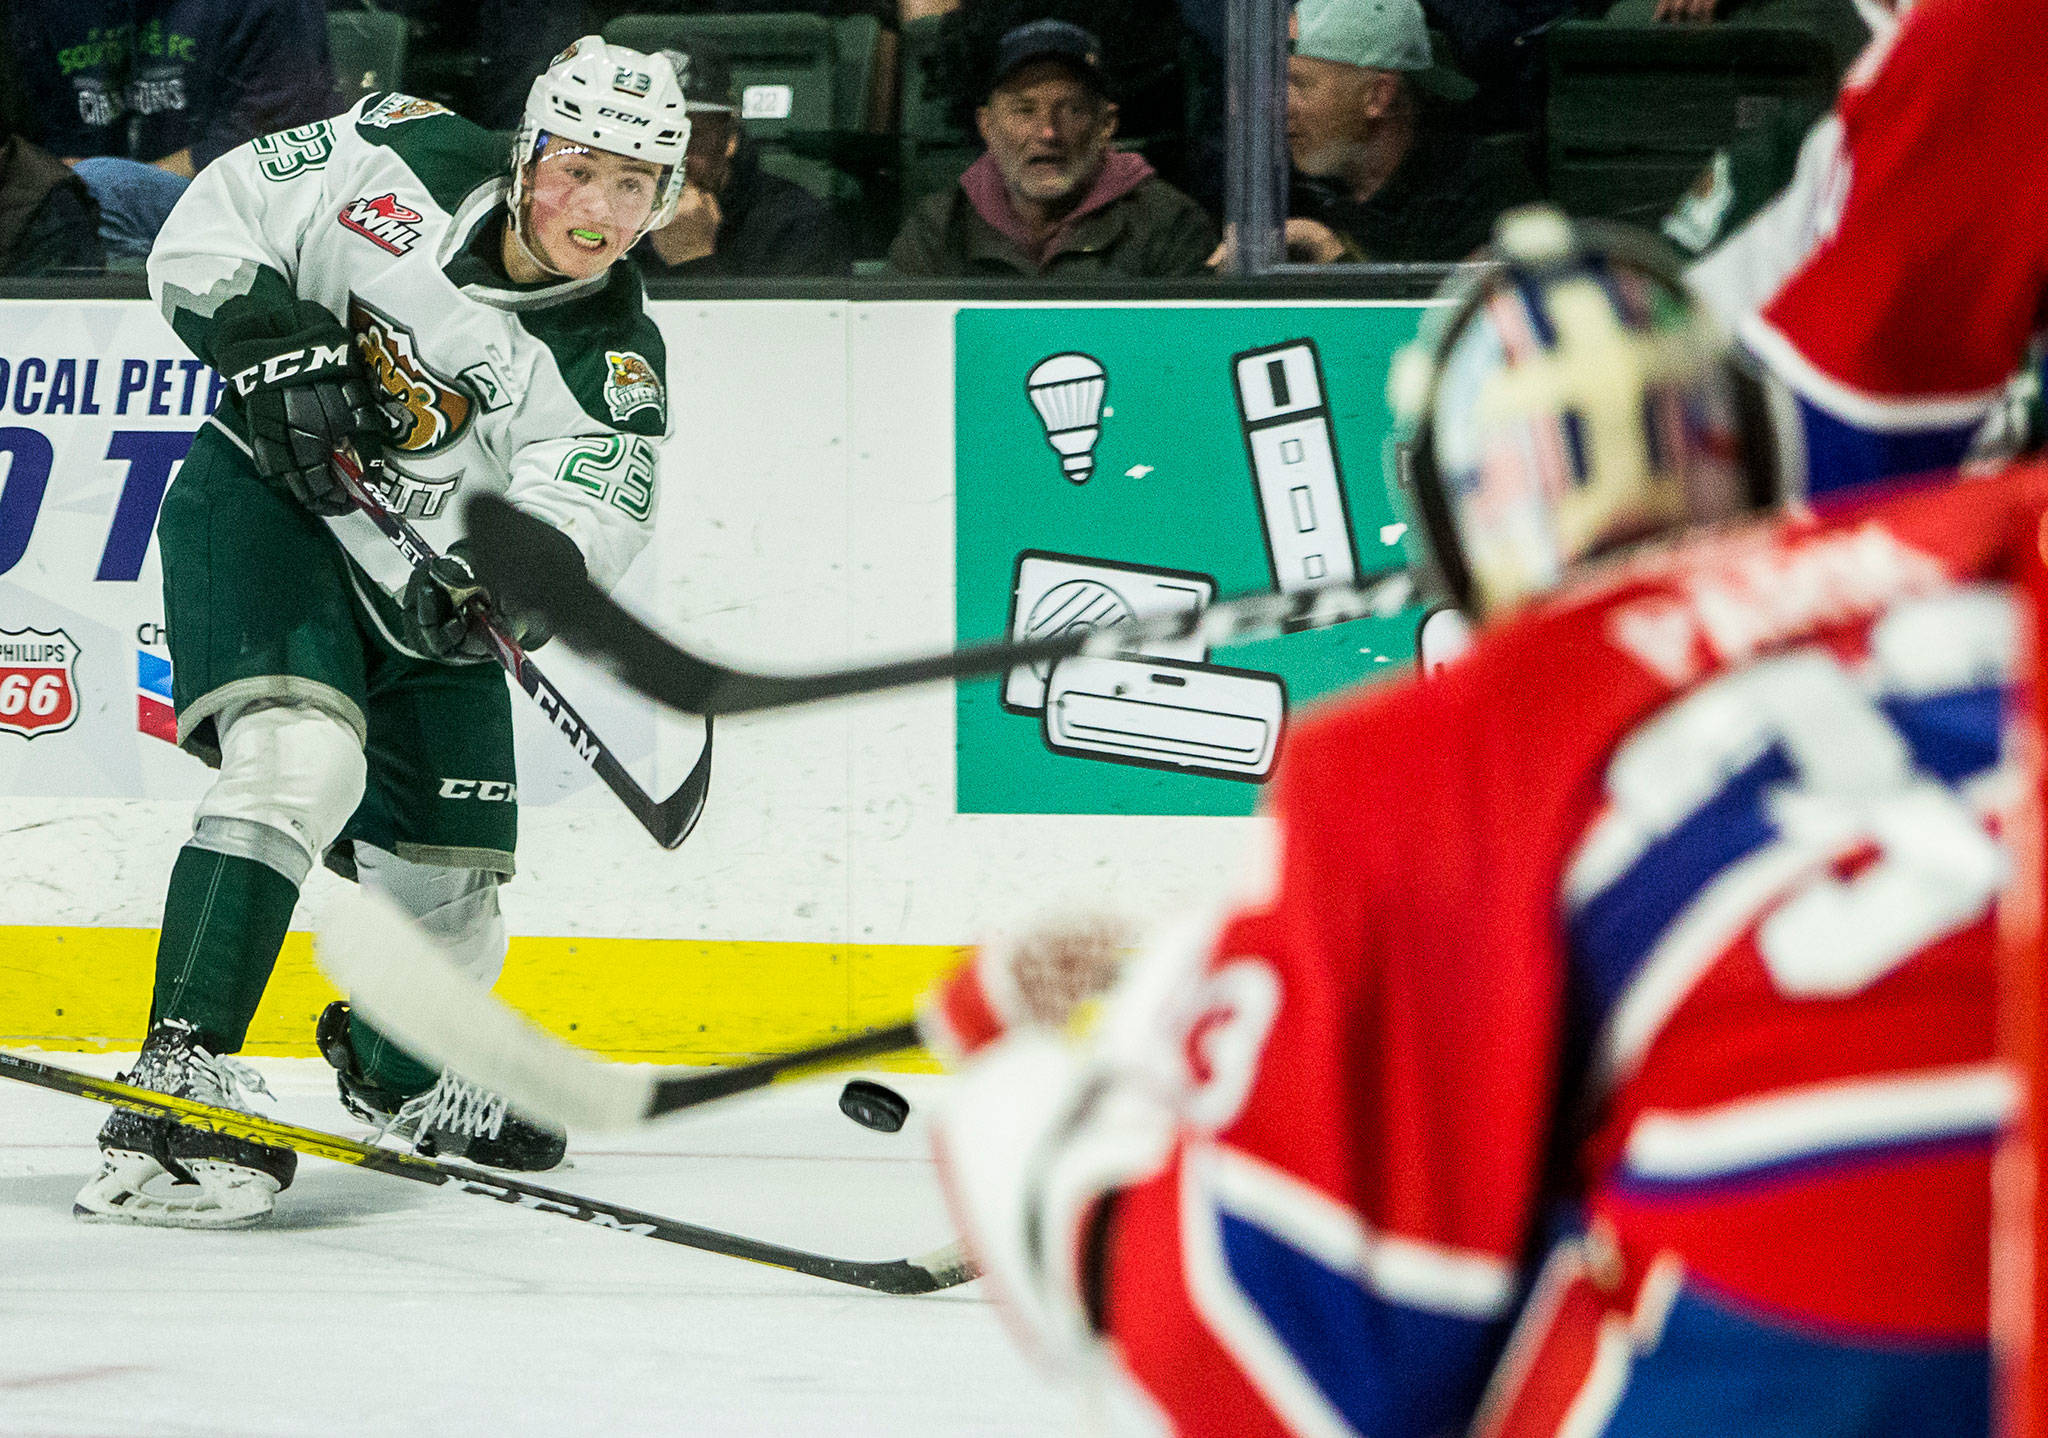 The Silvertips’ Jake Christiansen takes a shot at goal during a game against the Chiefs on Jan. 26, 2020, in Everett. (Olivia Vanni / The Herald)